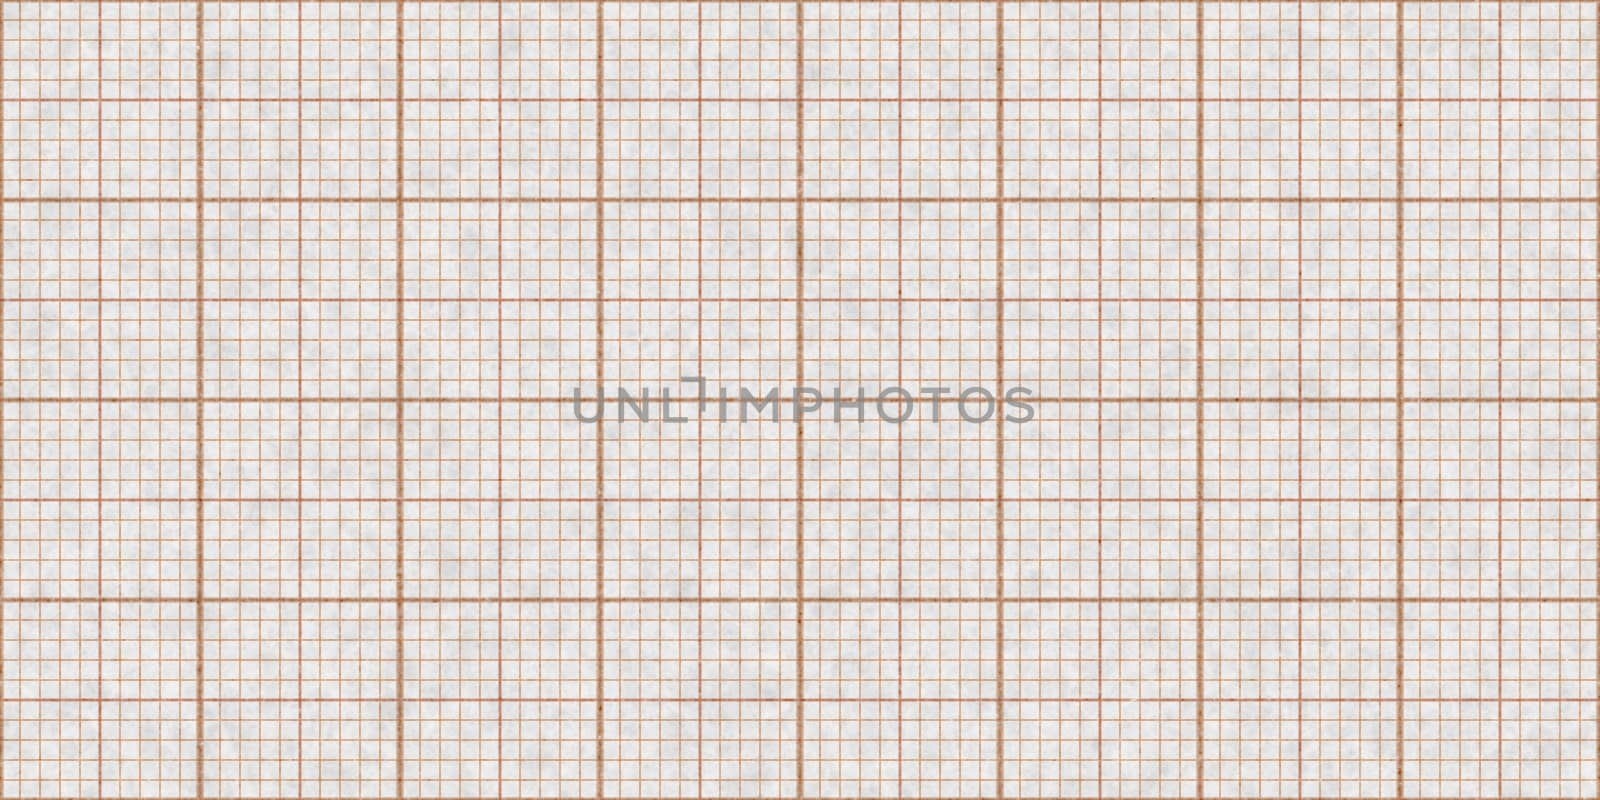 Orange Seamless Millimeter Paper Background. Tiling Graph Grid Texture. Empty Lined Pattern.